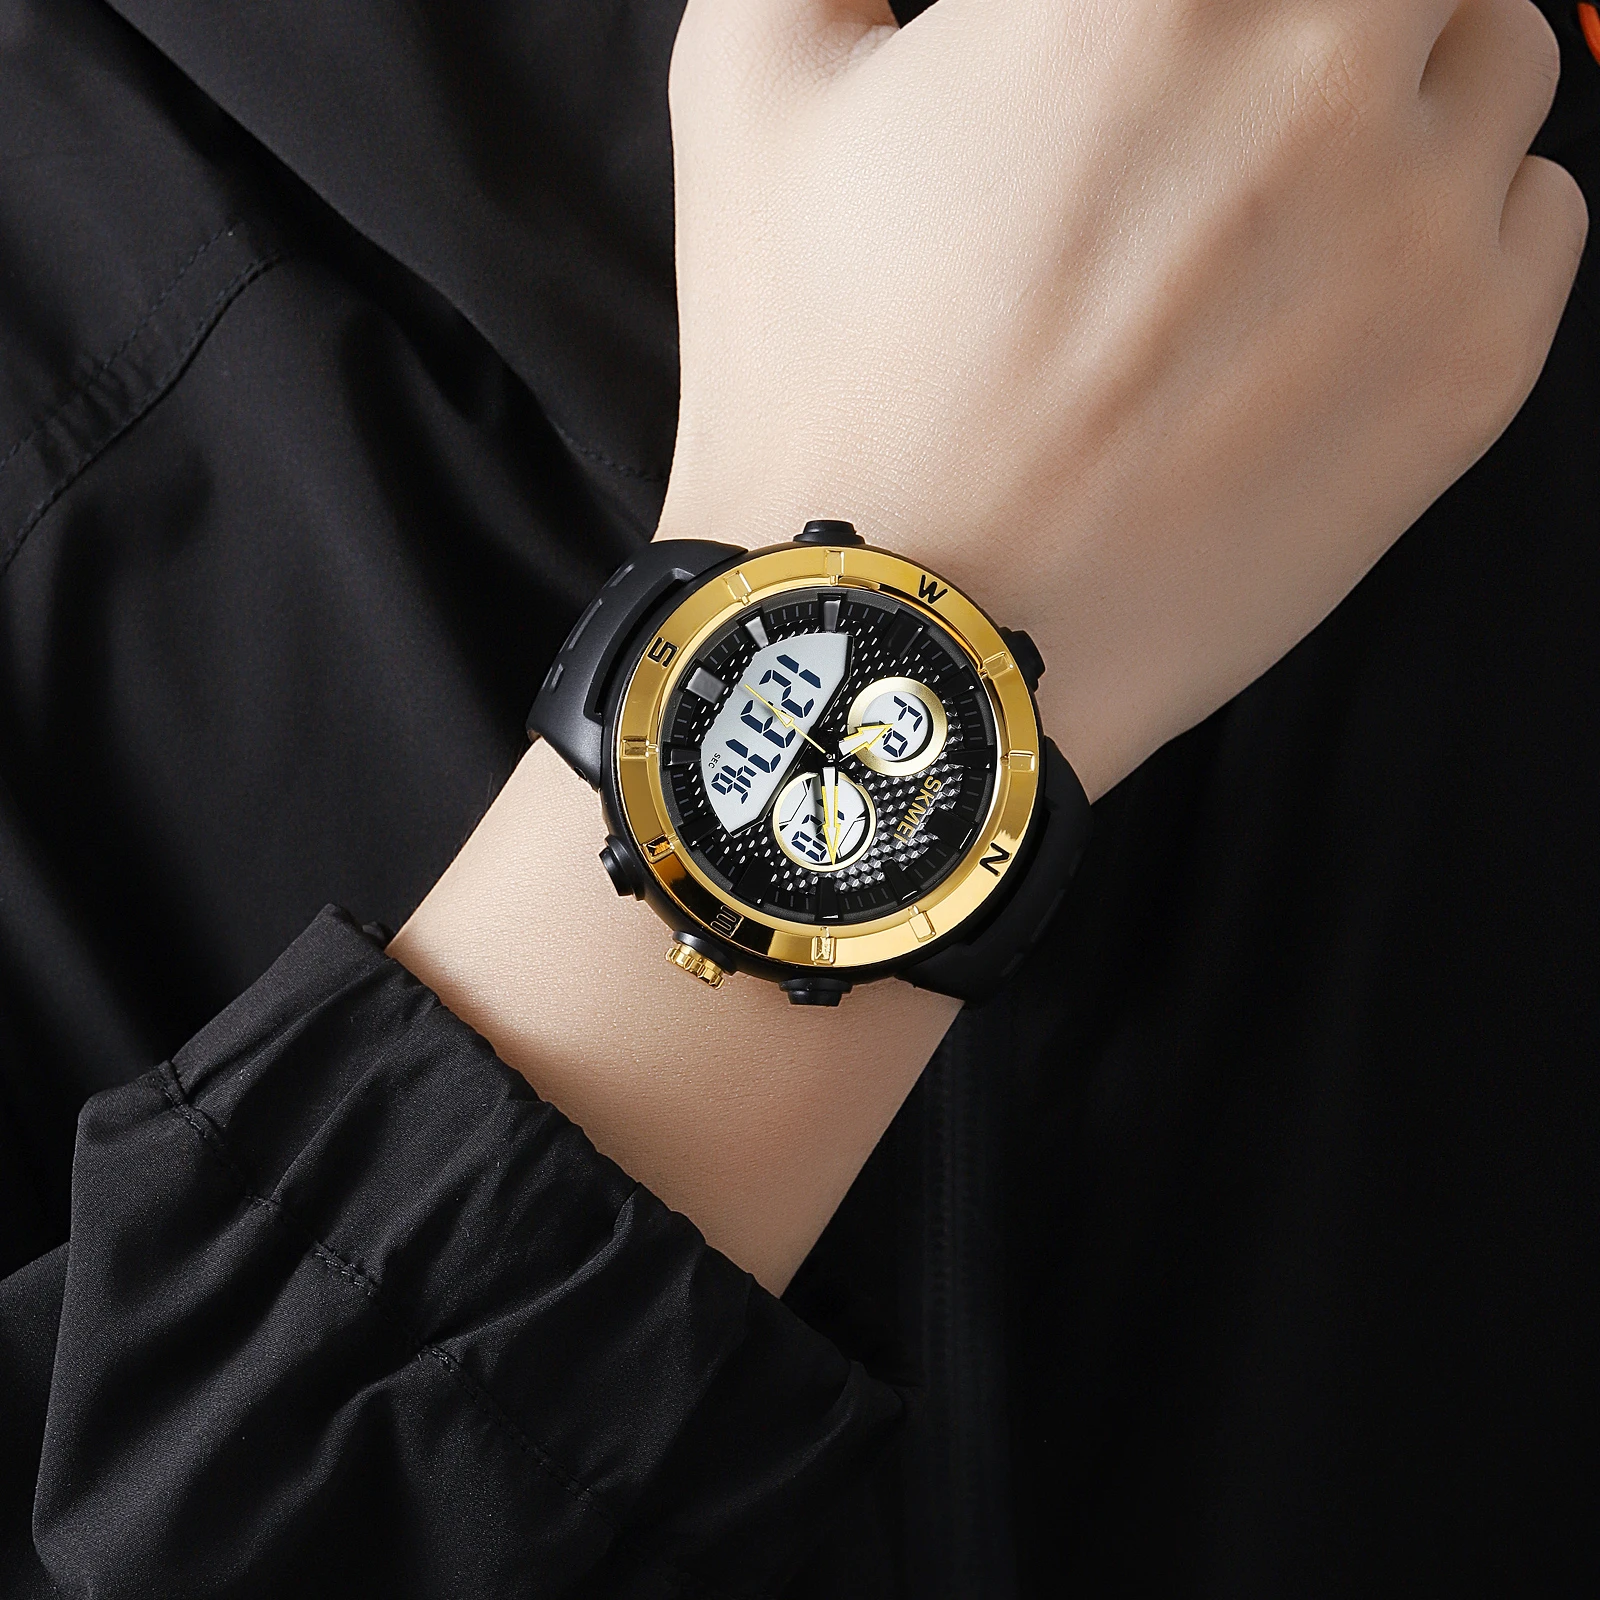 Avant-garde design for the fashion-forward watch Sports Watch Waterproof feature adds versatility and peace of mind